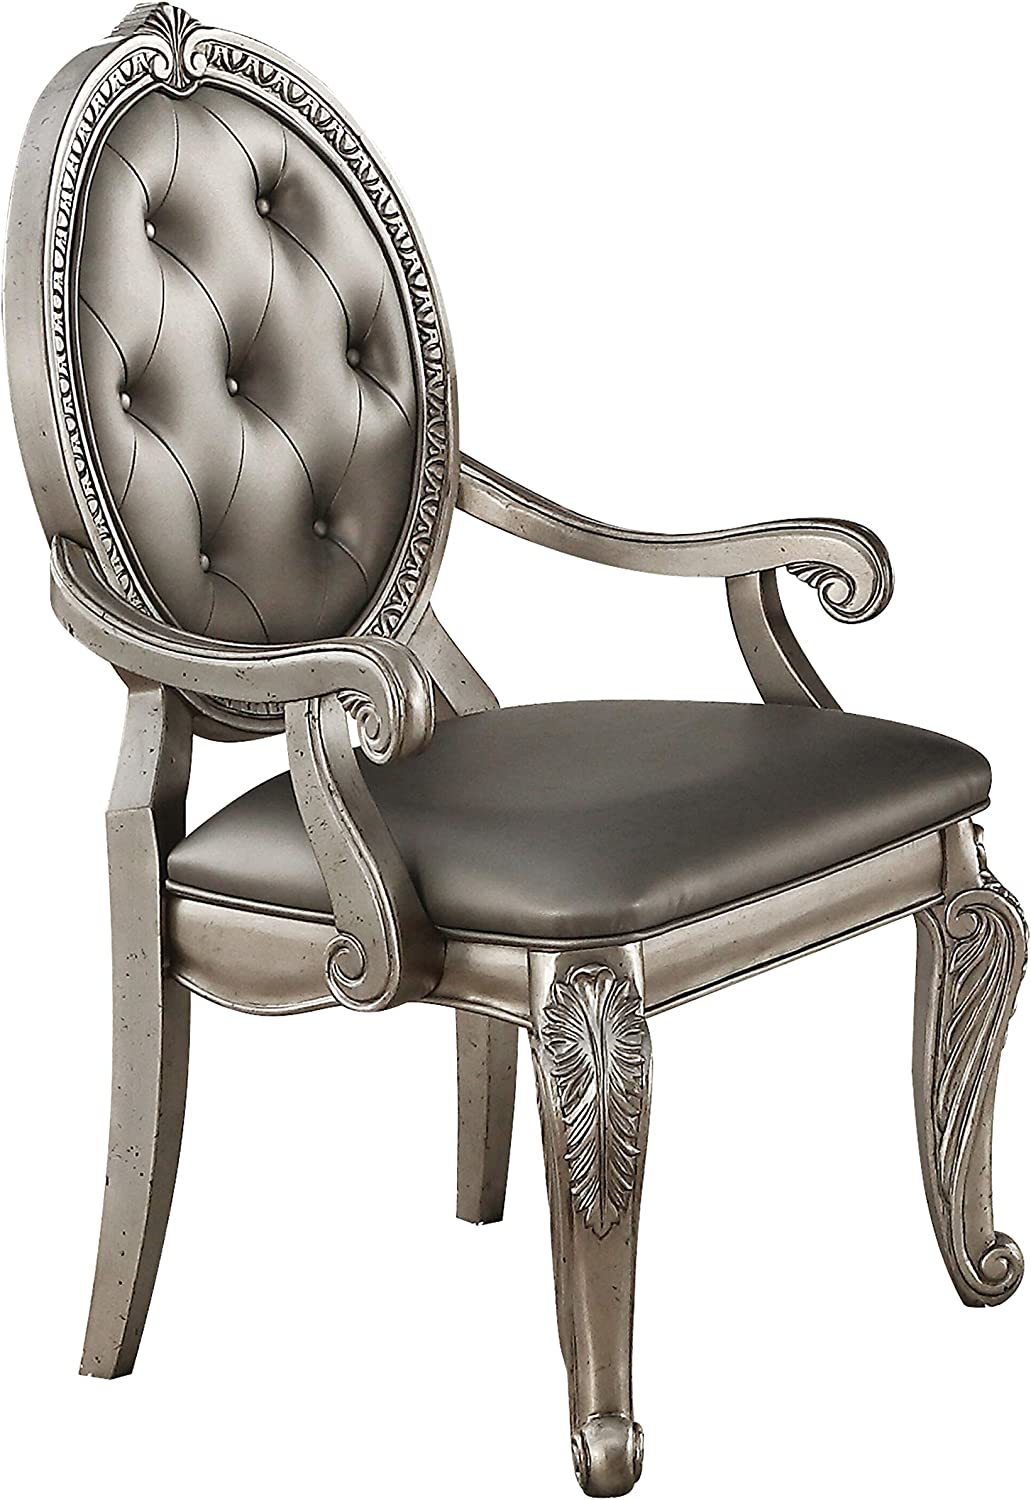 Antique Champagne Northville Armchair From Acme Furniture. - $576.97